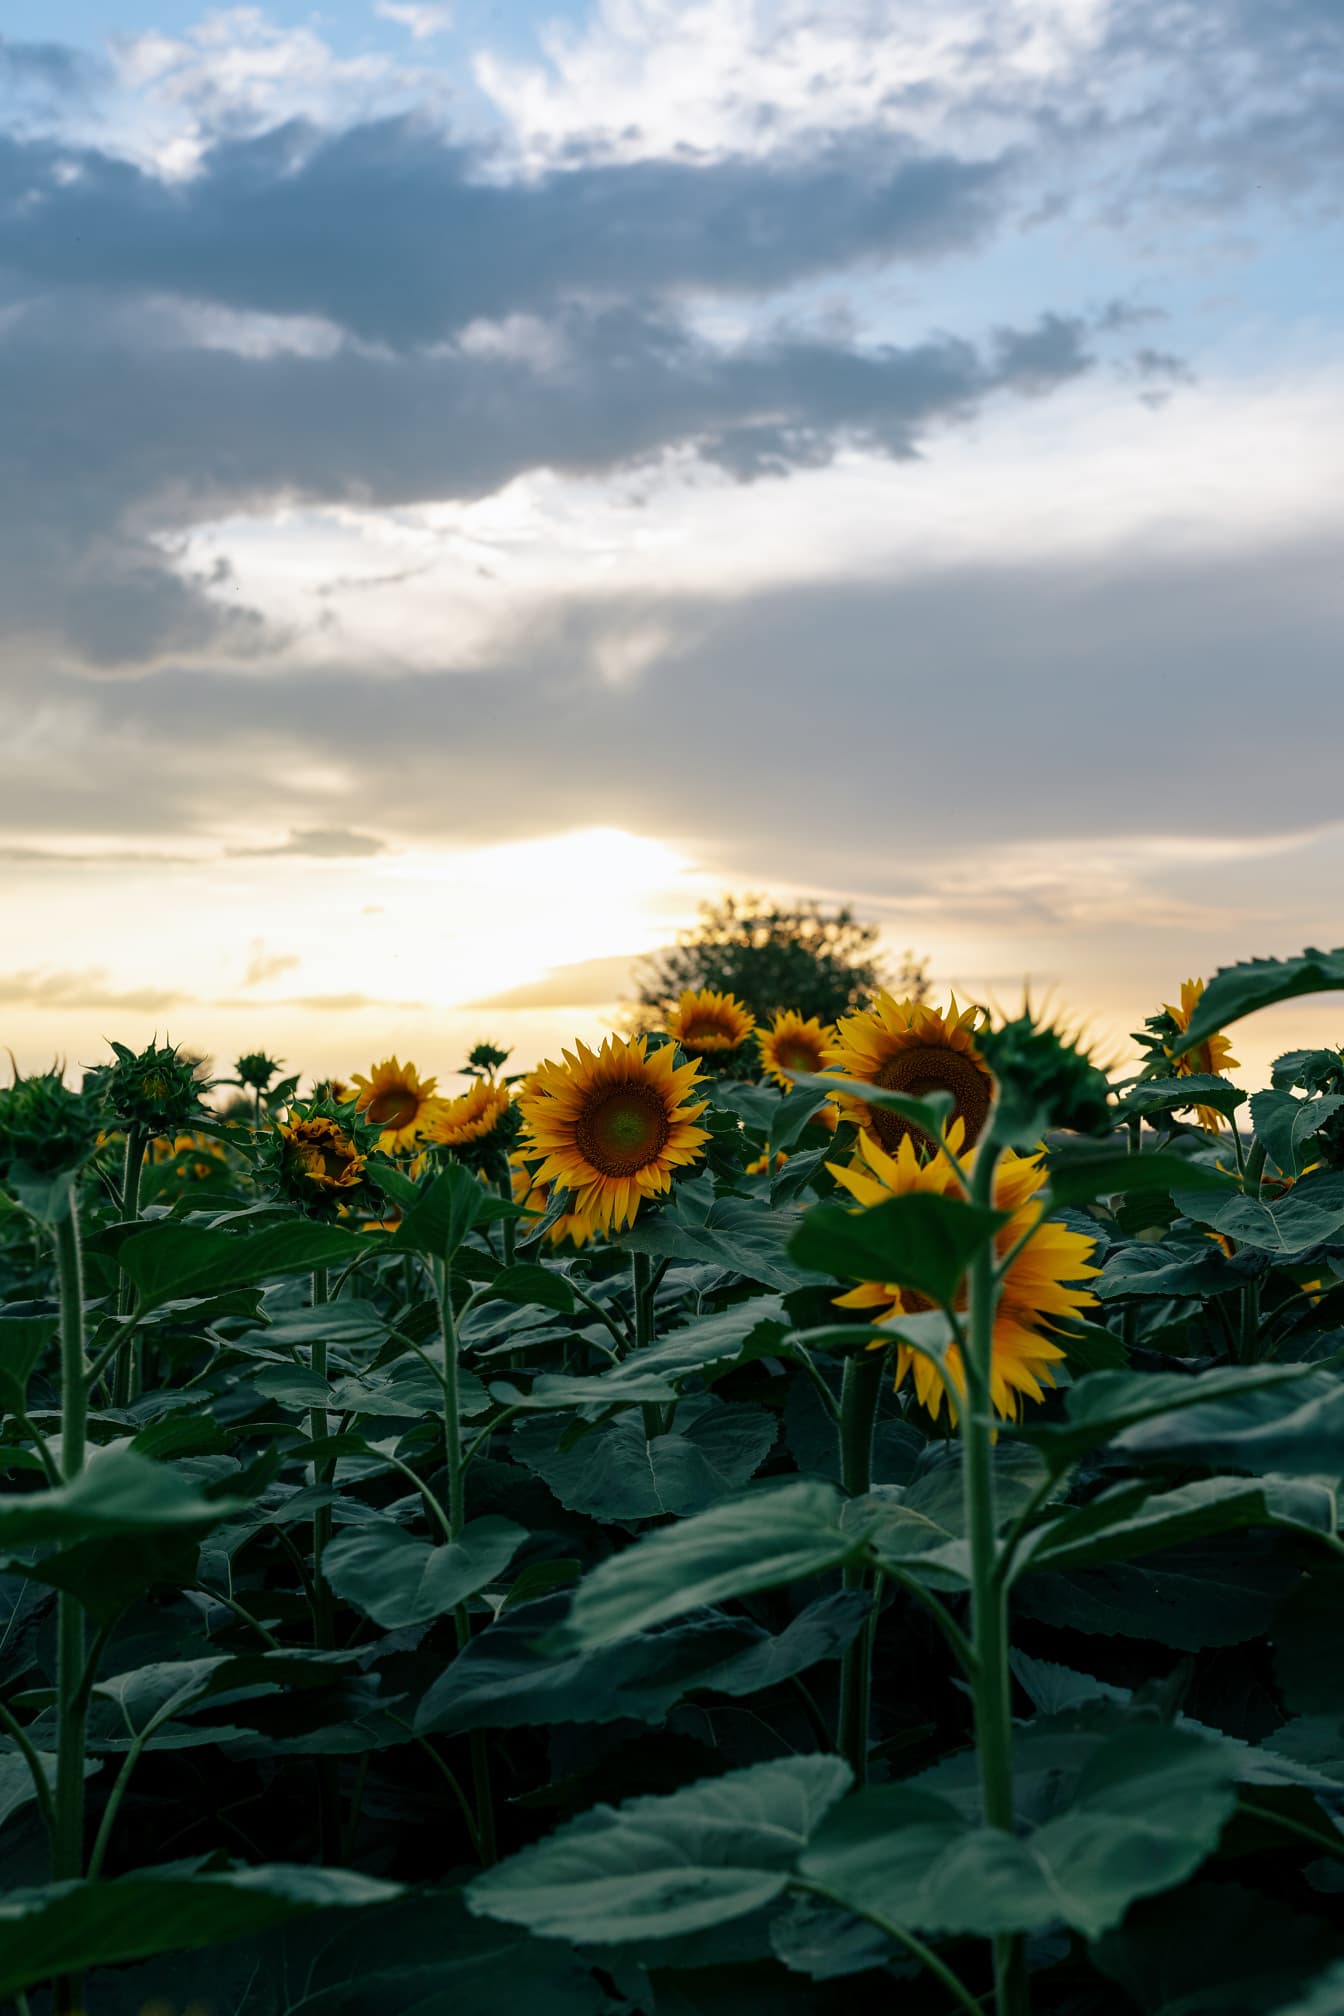 Sunflower agricultural field in dusk under cloudy sky